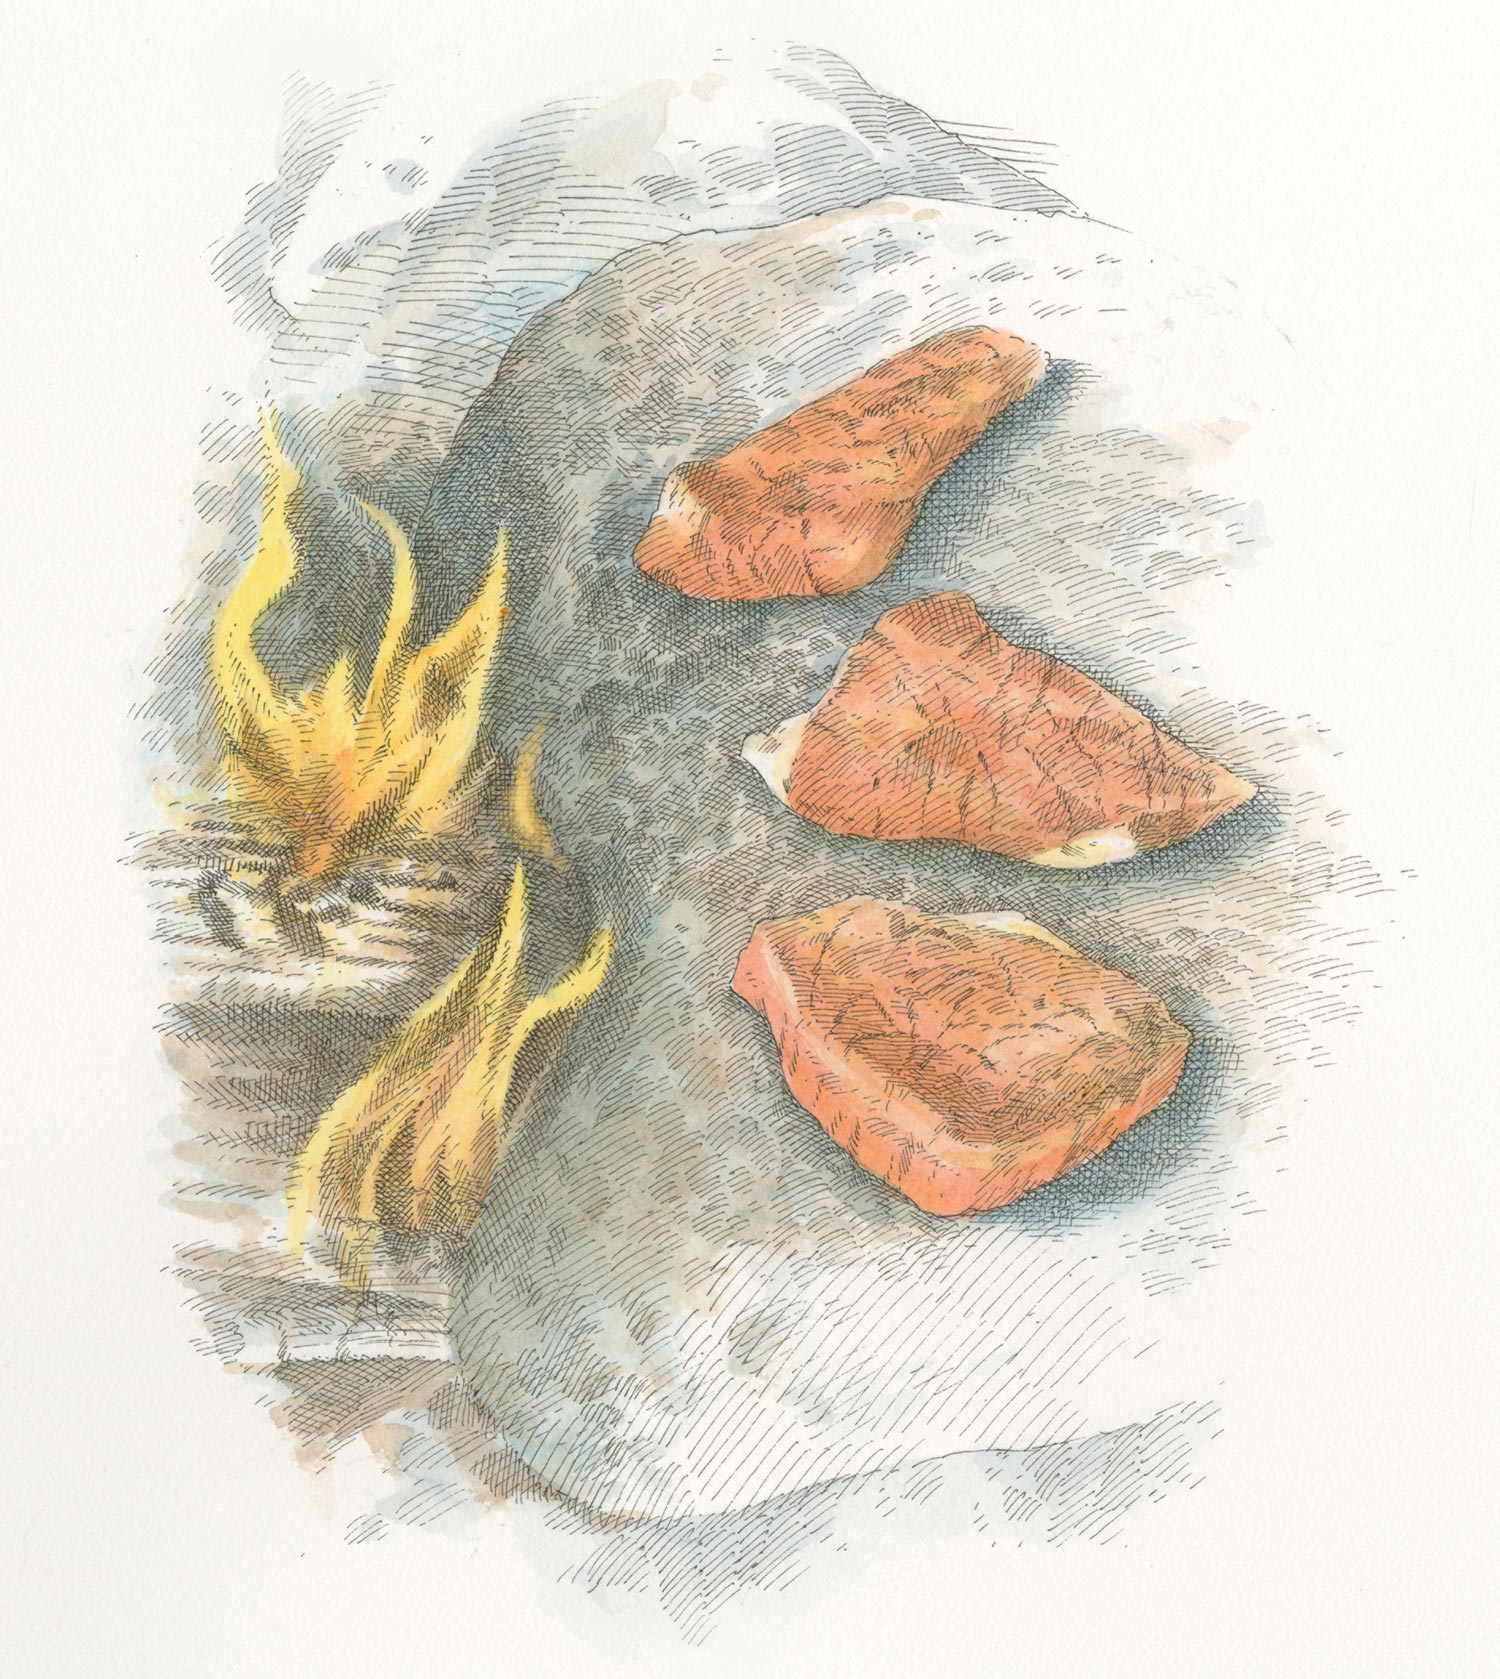 steaks cook on rock next to open flames